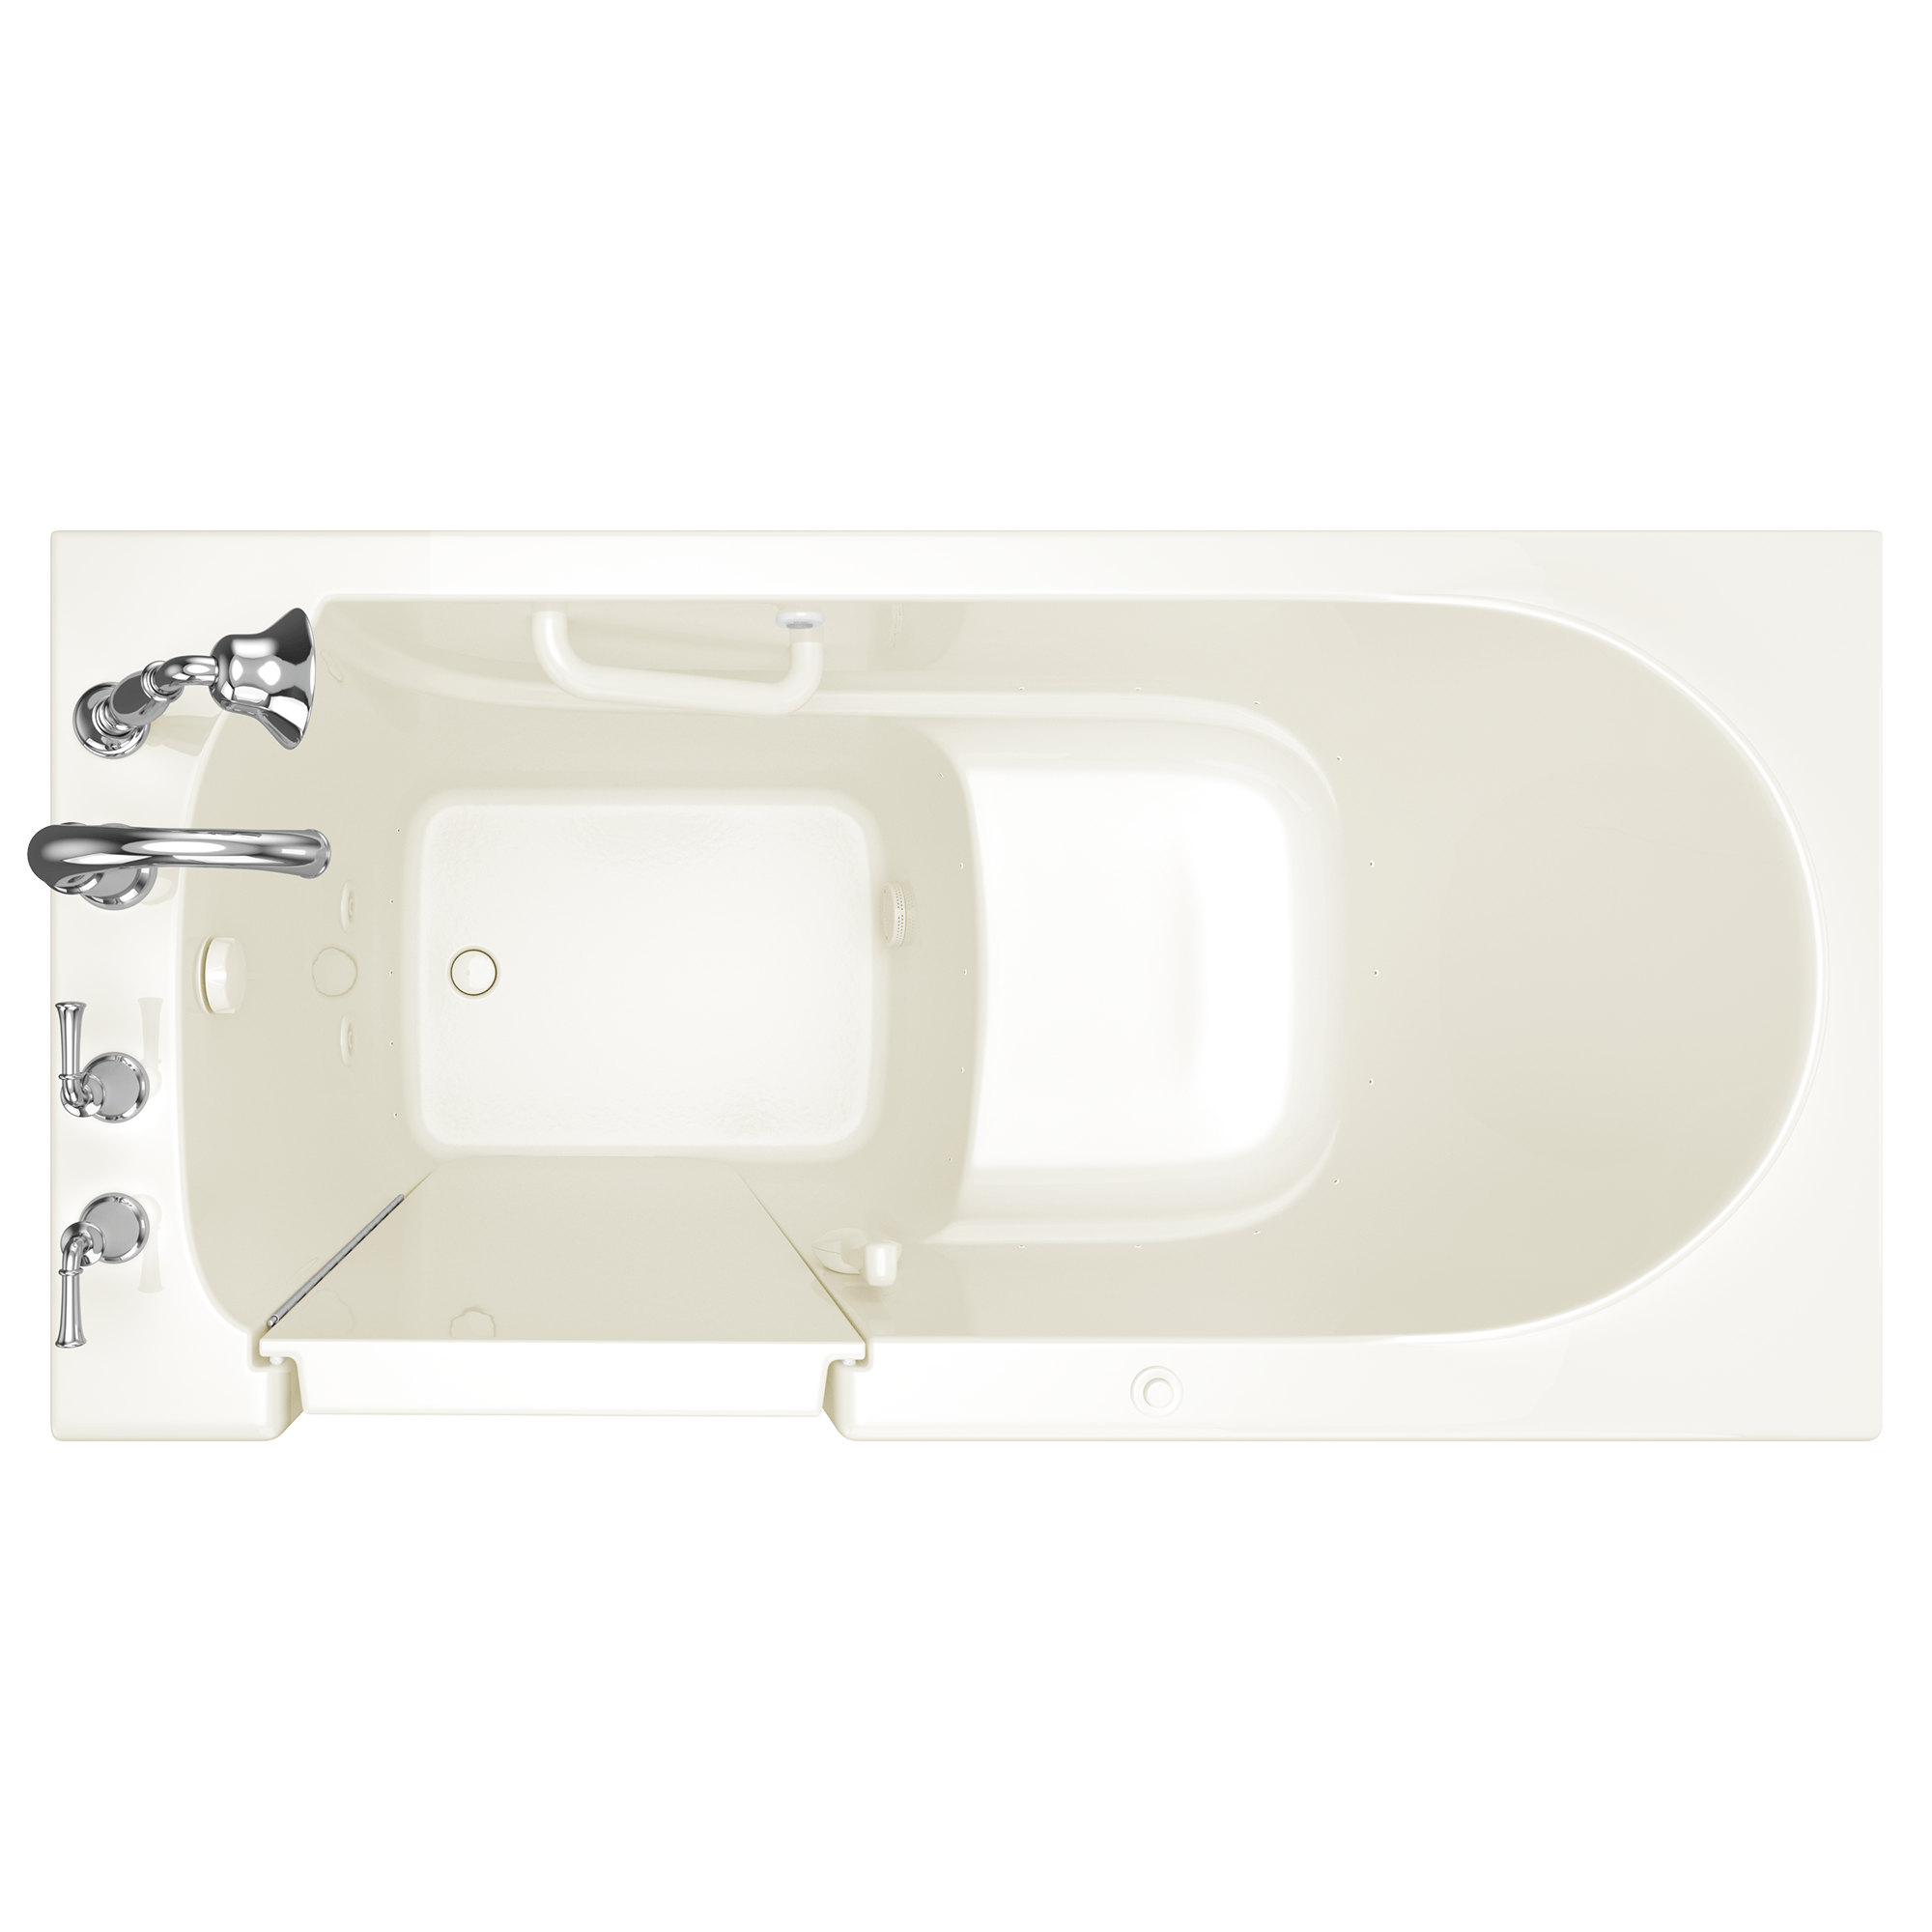 Gelcoat Value Series 30x60 Inch Walk-In Bathtub with Air Spa System - Left Hand Door and Drain